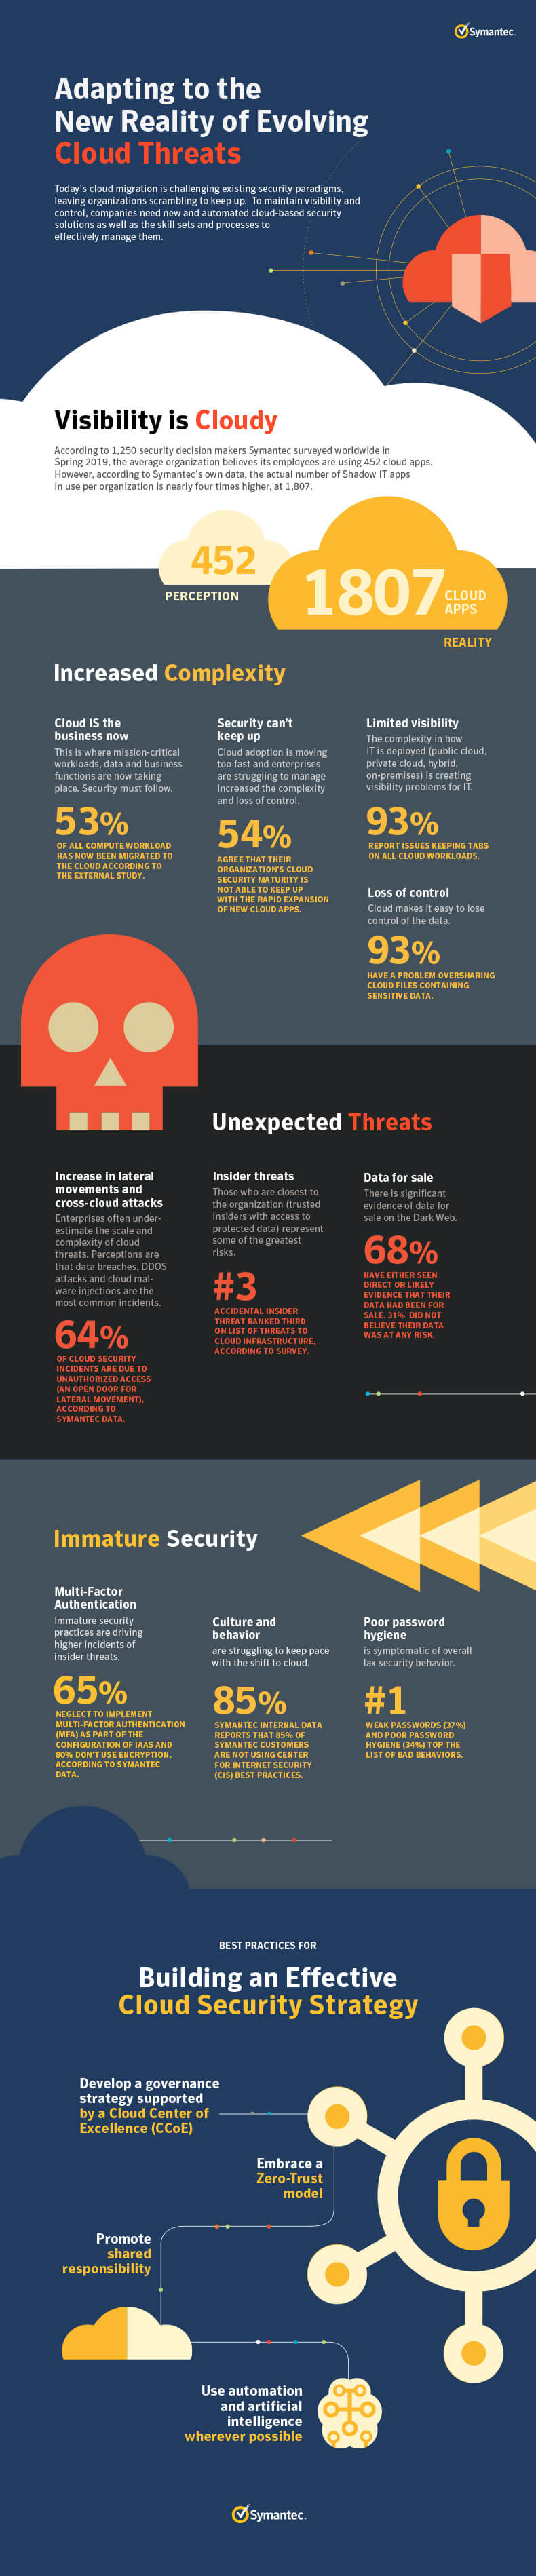 Infographic for Adapting to the New Reality of Cloud Threats  as described below